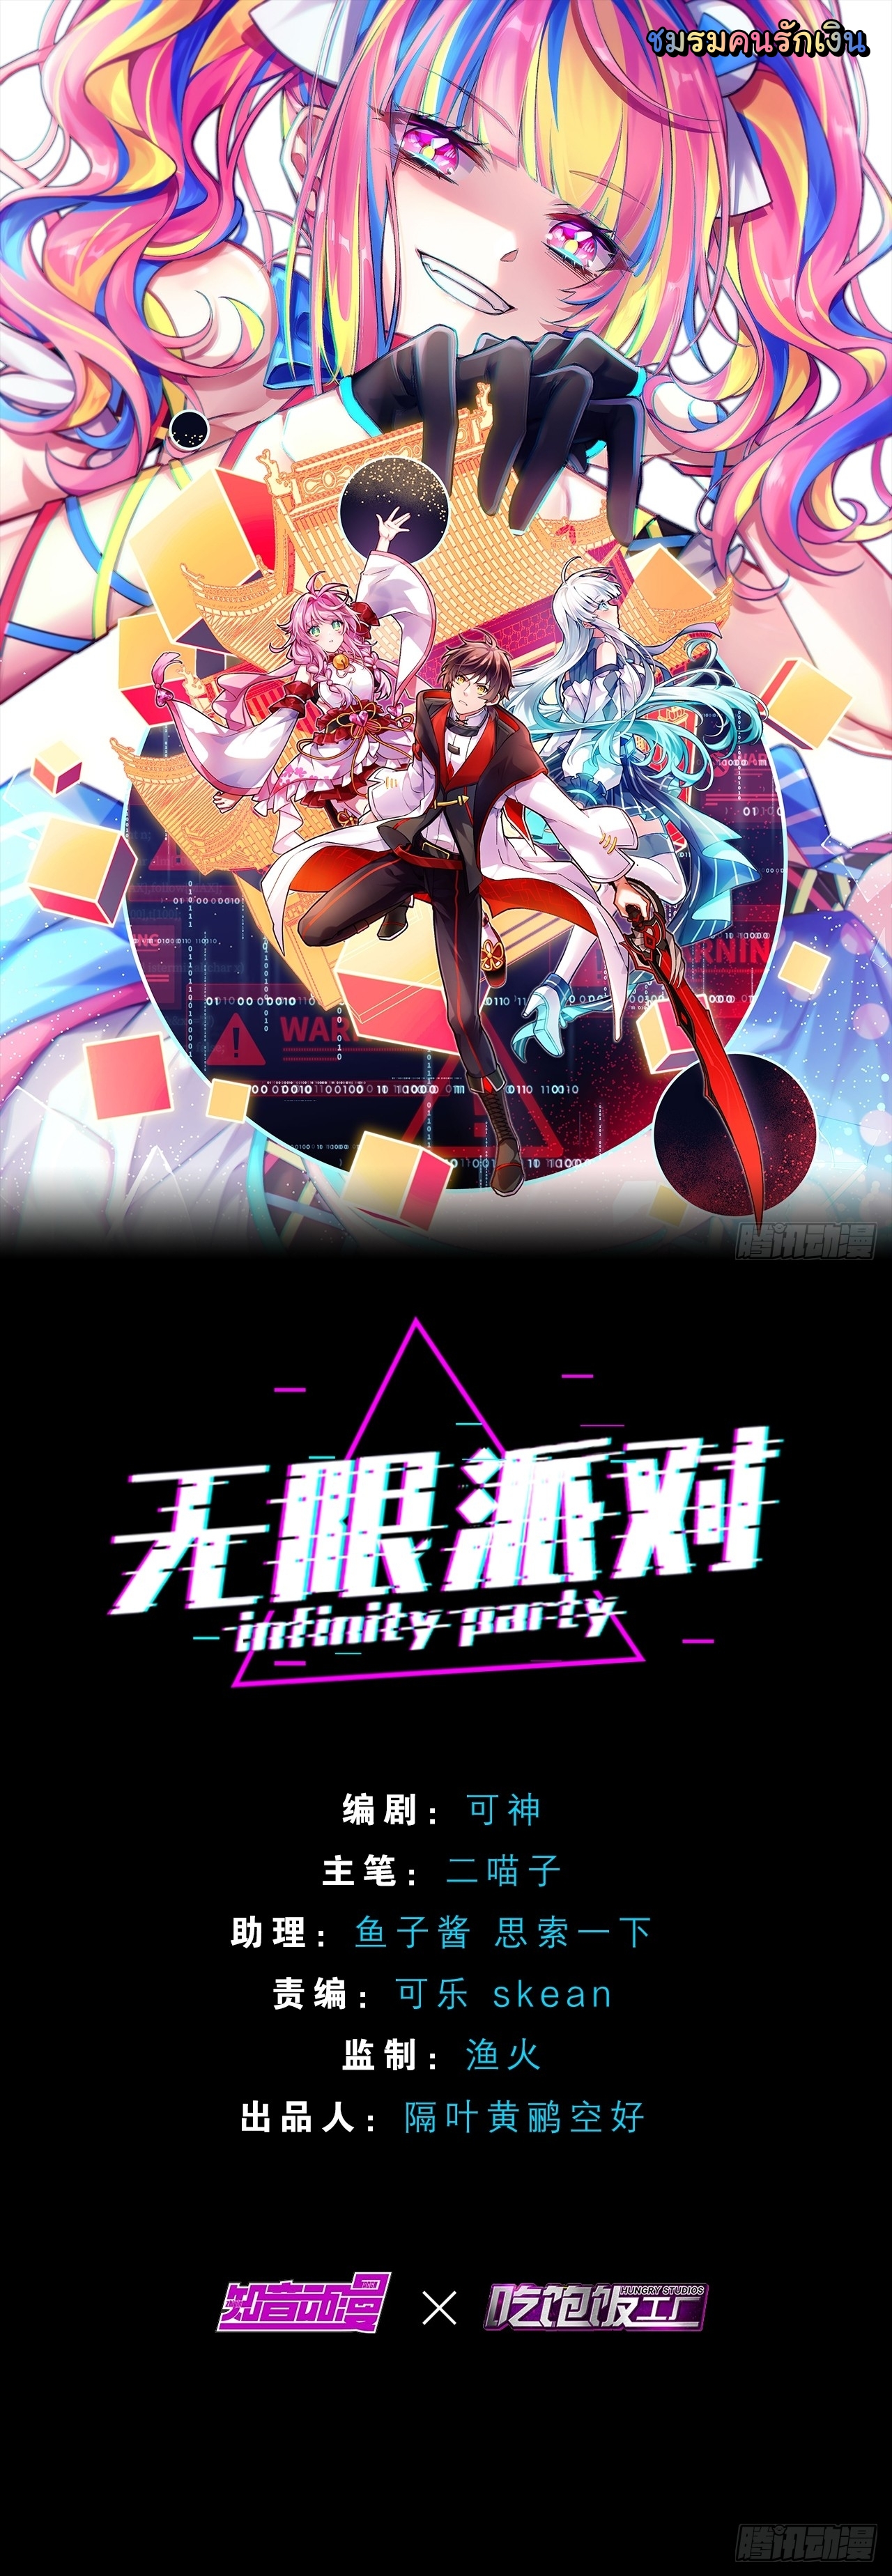 Infinity party 9 (1)